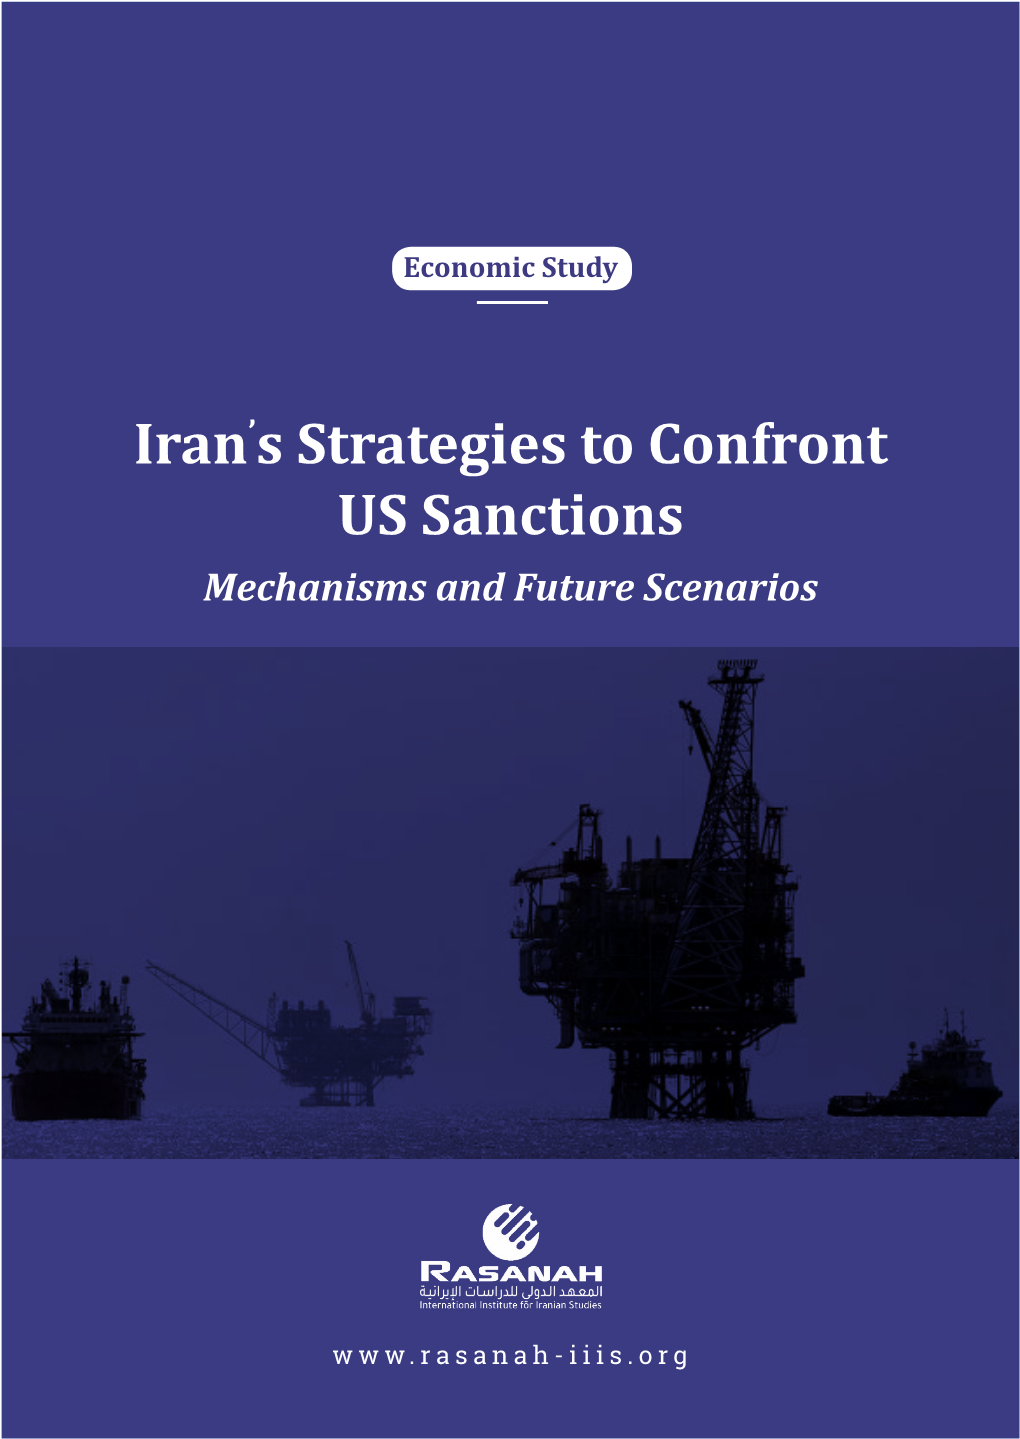 Iran's Strategies to Confront US Sanctions